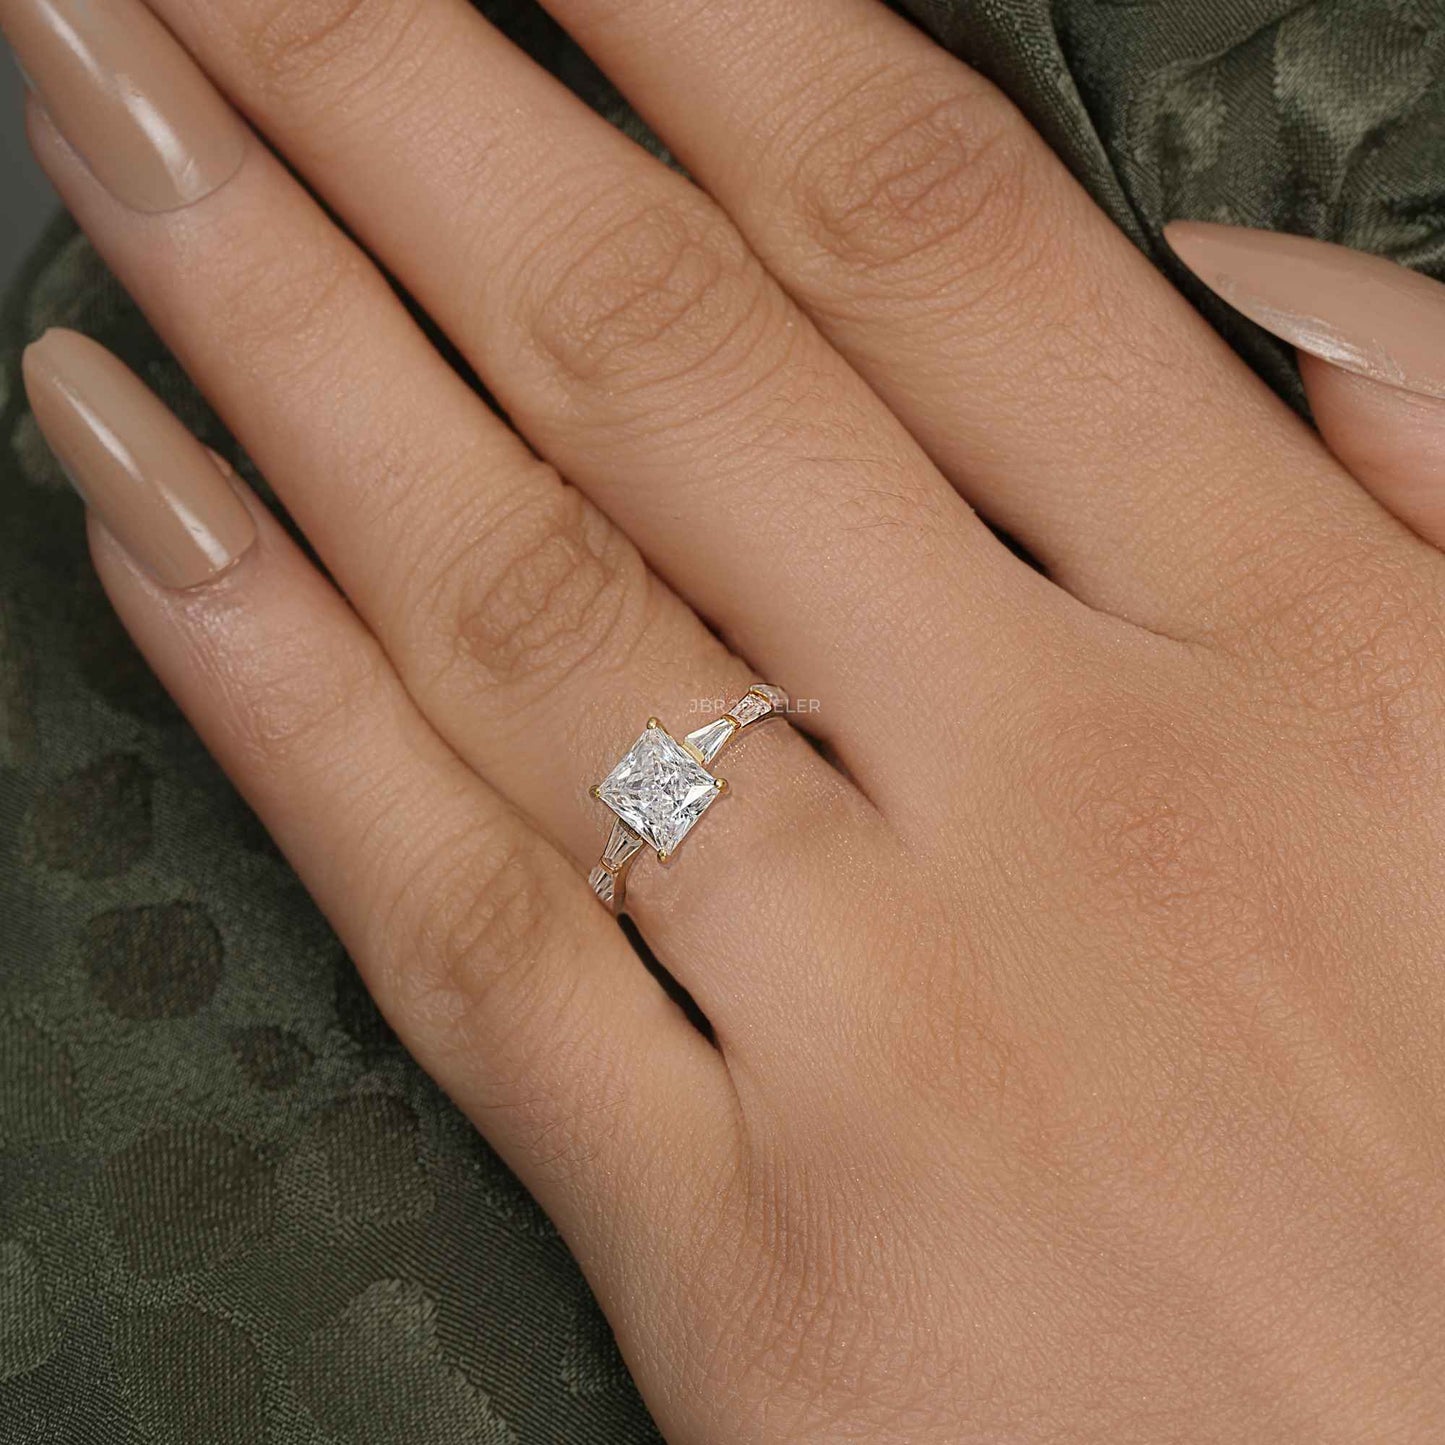 Princess Lab Grown Diamond Engagement Ring with Side Stone Baguette